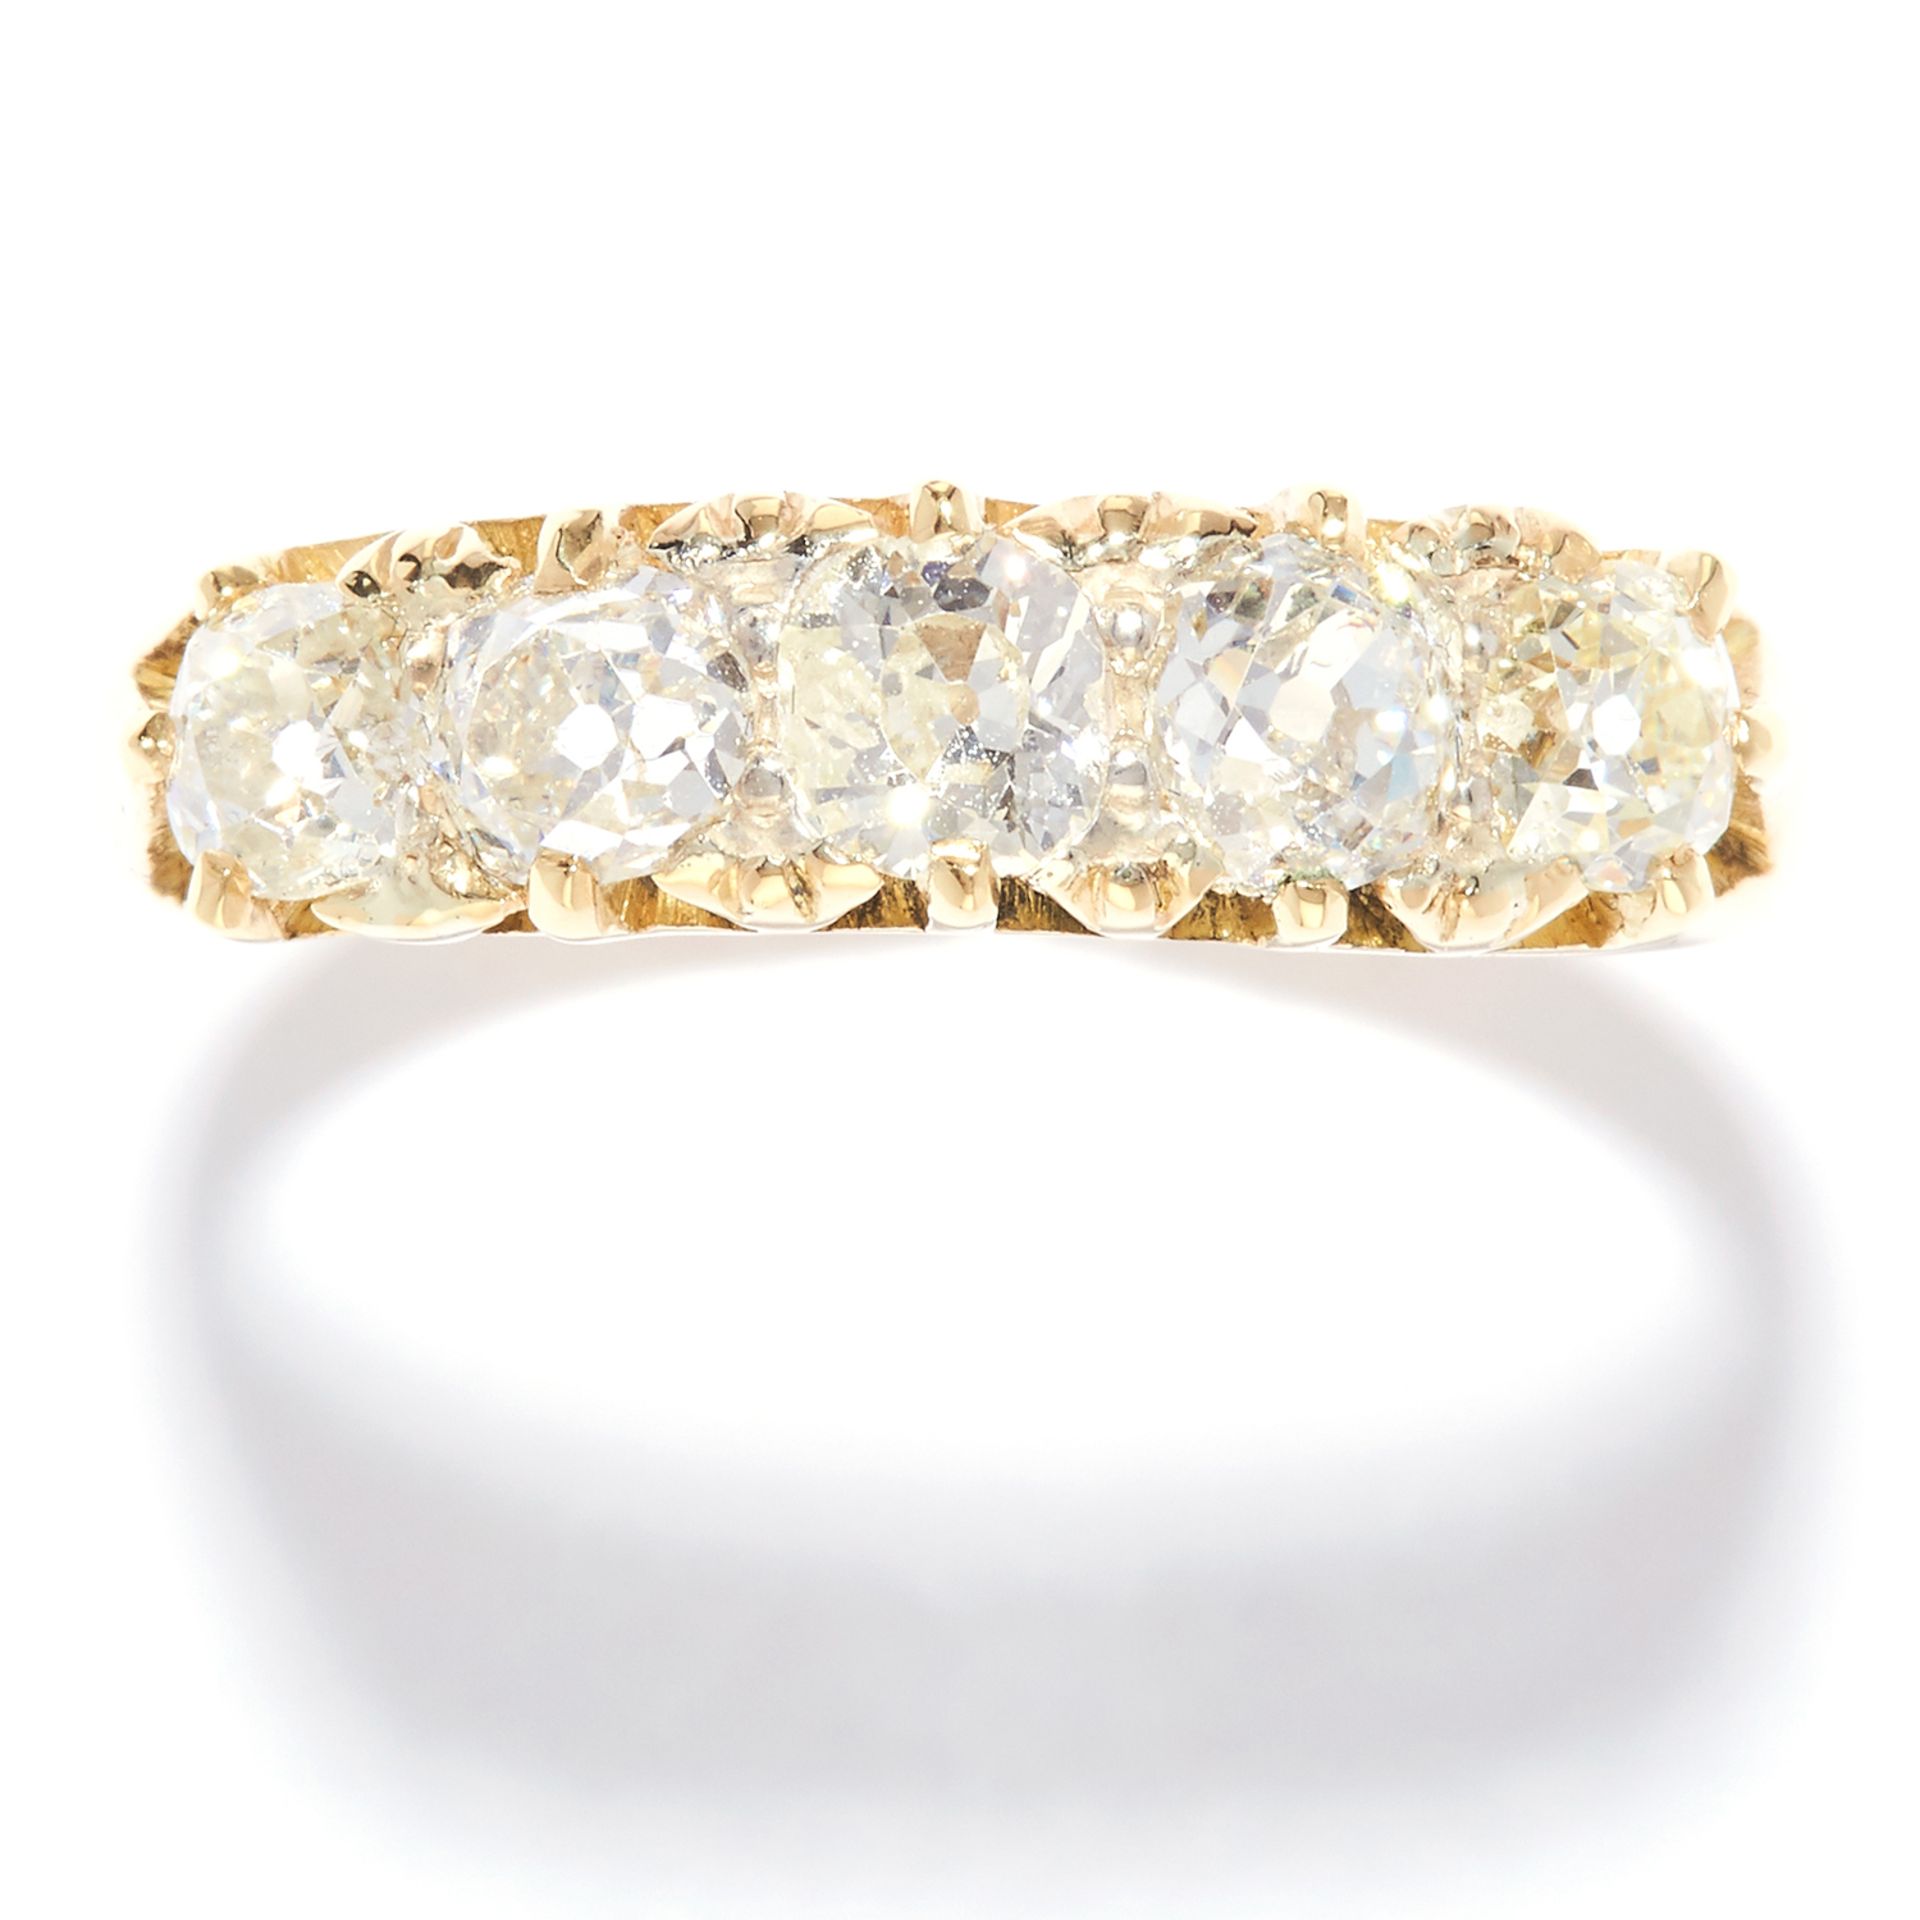 ANTIQUE 1.85 CARAT FIVE STONE DIAMOND RING in 18ct yellow gold, set with five old cut diamonds